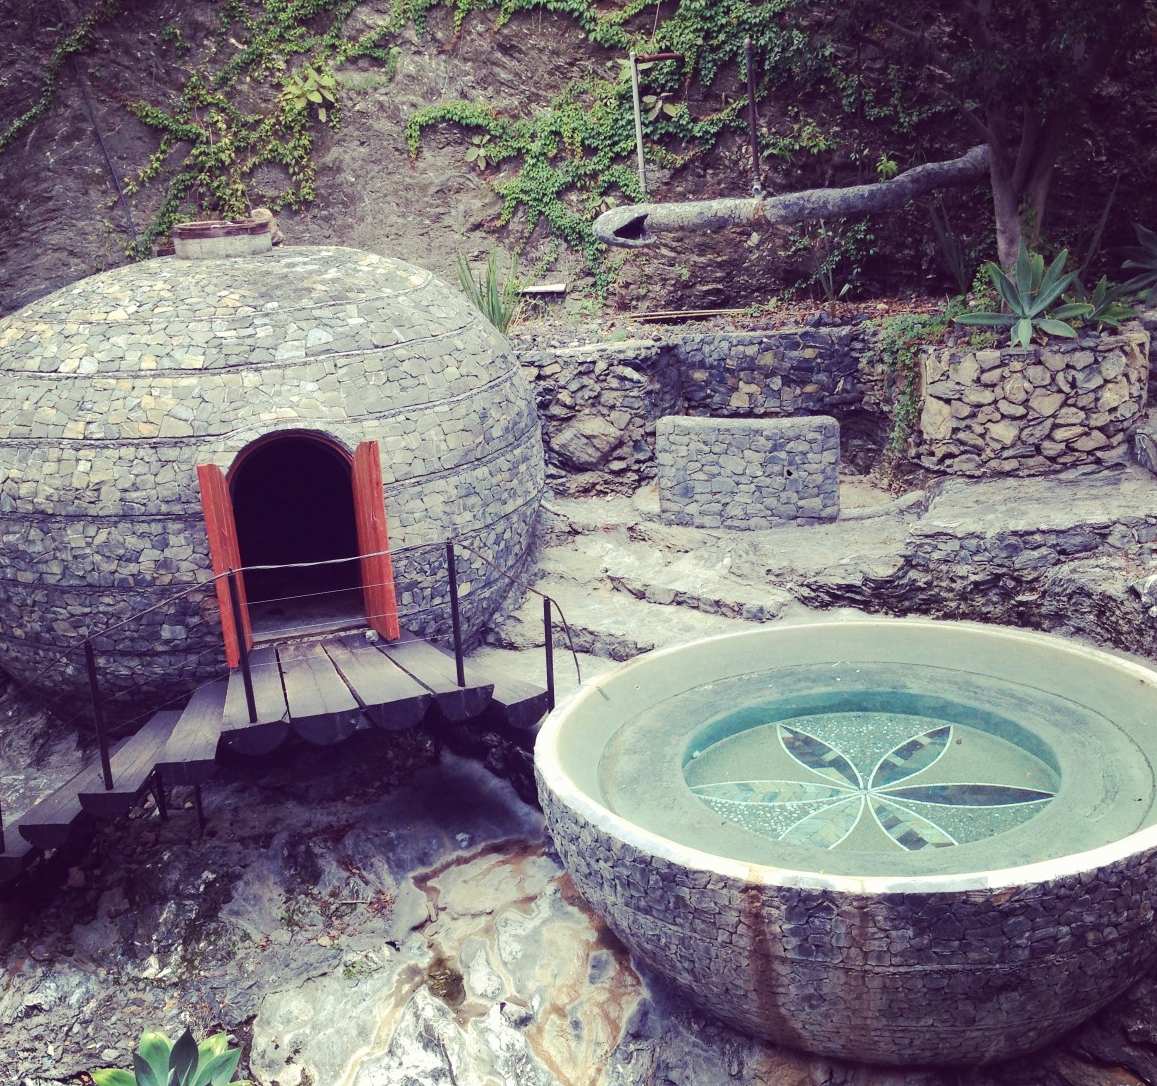 temazcal hut and pool